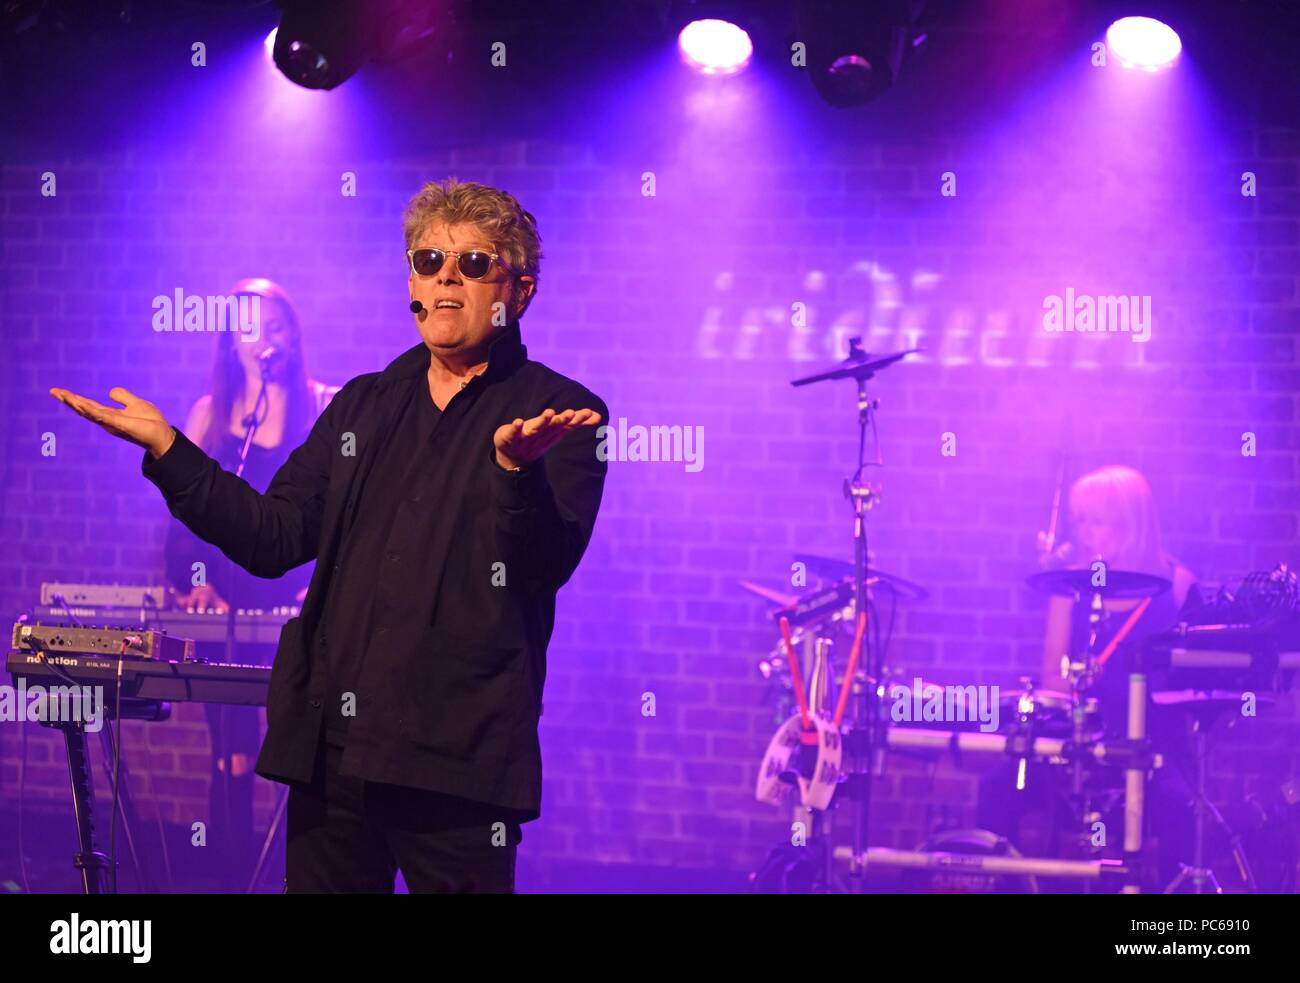 New York, NY, USA. 31st July, 2018. Tom Bailey in attendance for The Thompson Twins' Tom Bailey in Concert, Iridium, New York, NY July 31, 2018. Credit: Derek Storm/Everett Collection/Alamy Live News Stock Photo